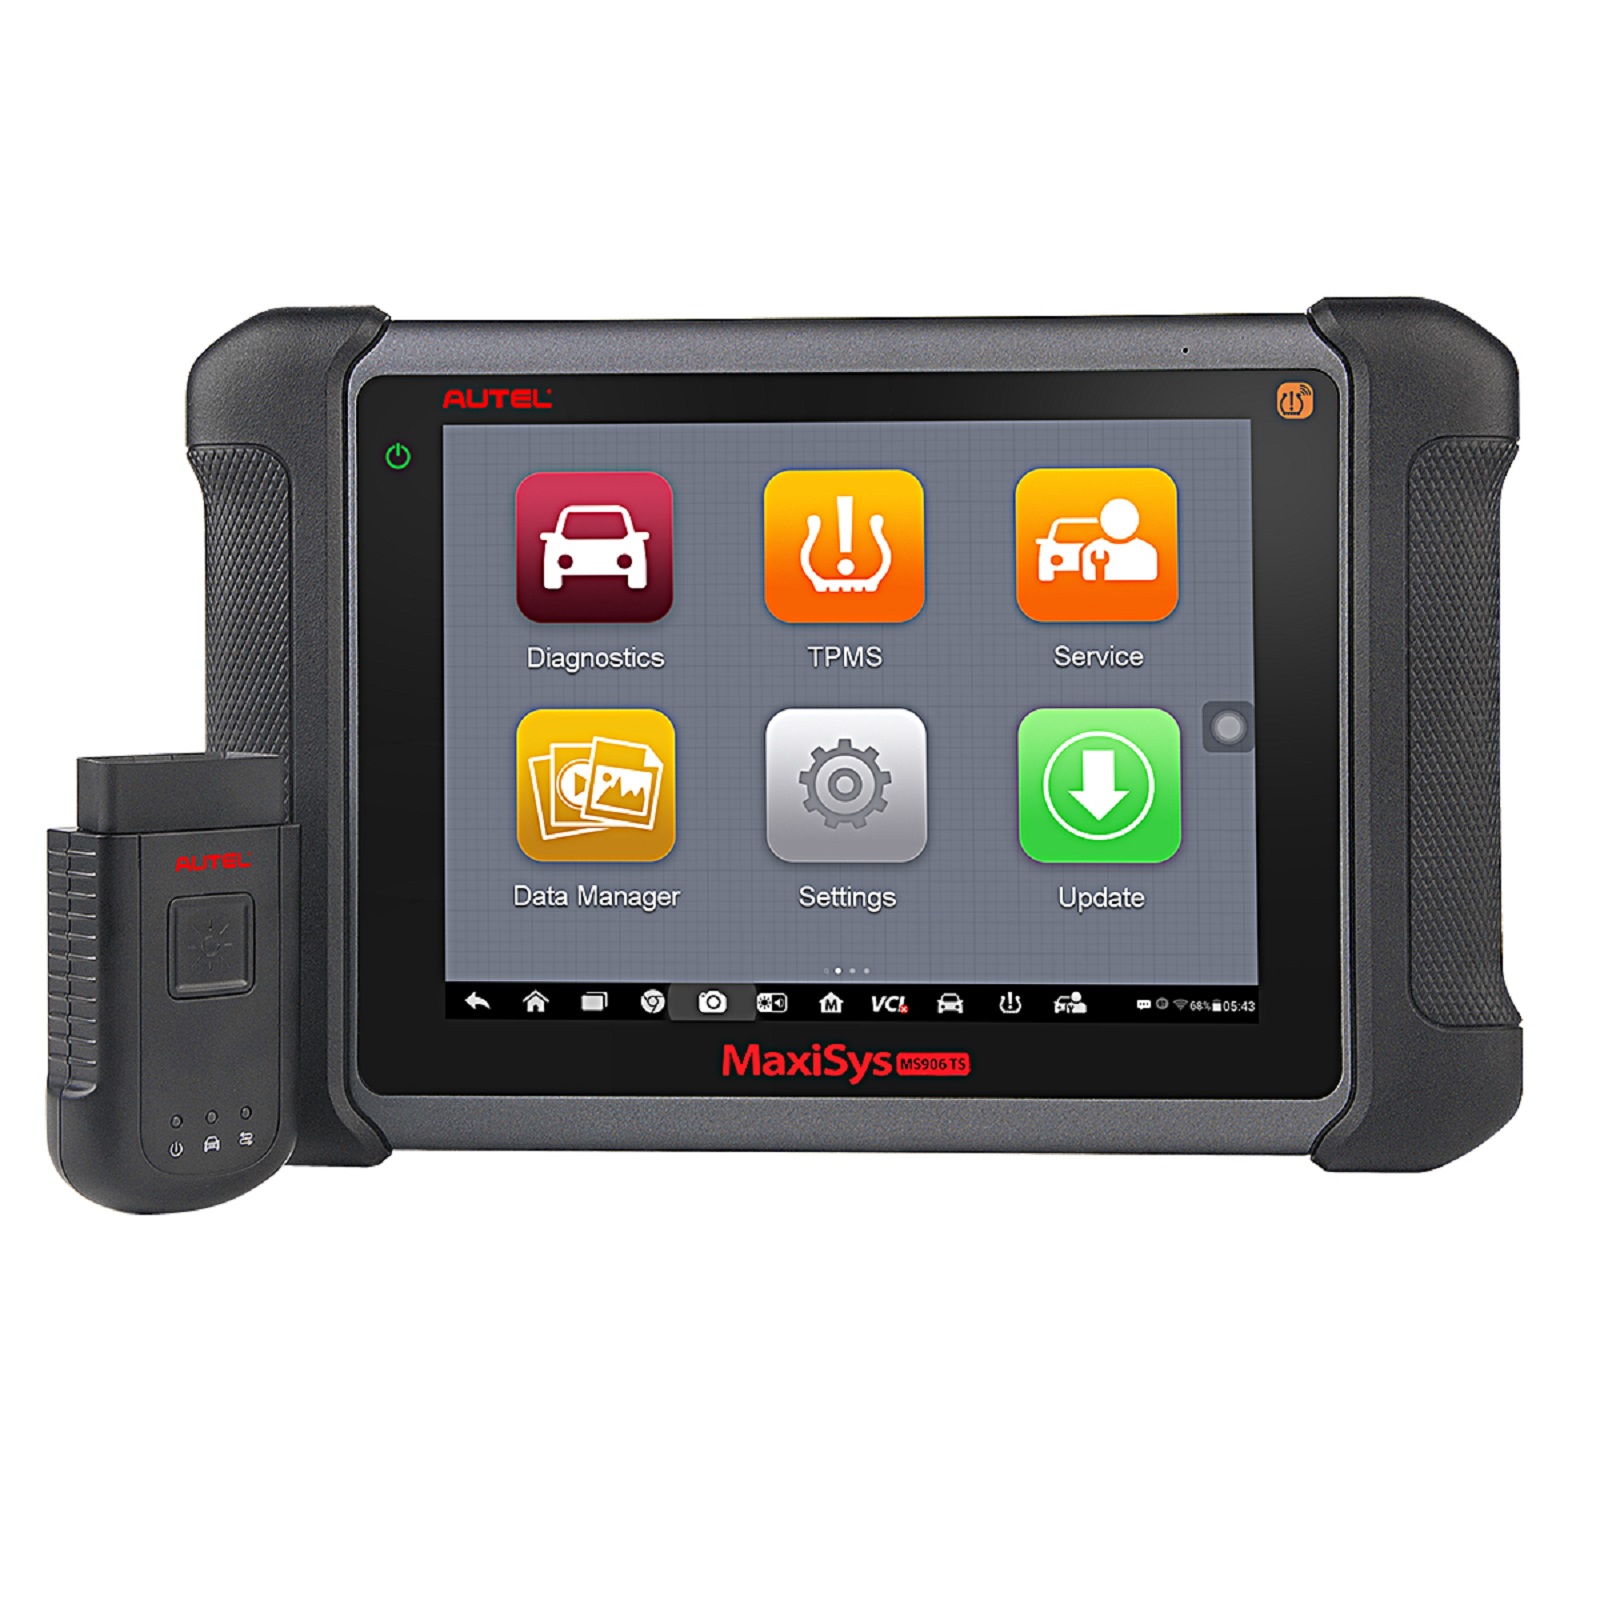 Original AUTEL MaxiSys MS906TS All in One TPMS Tool with ECU Coding